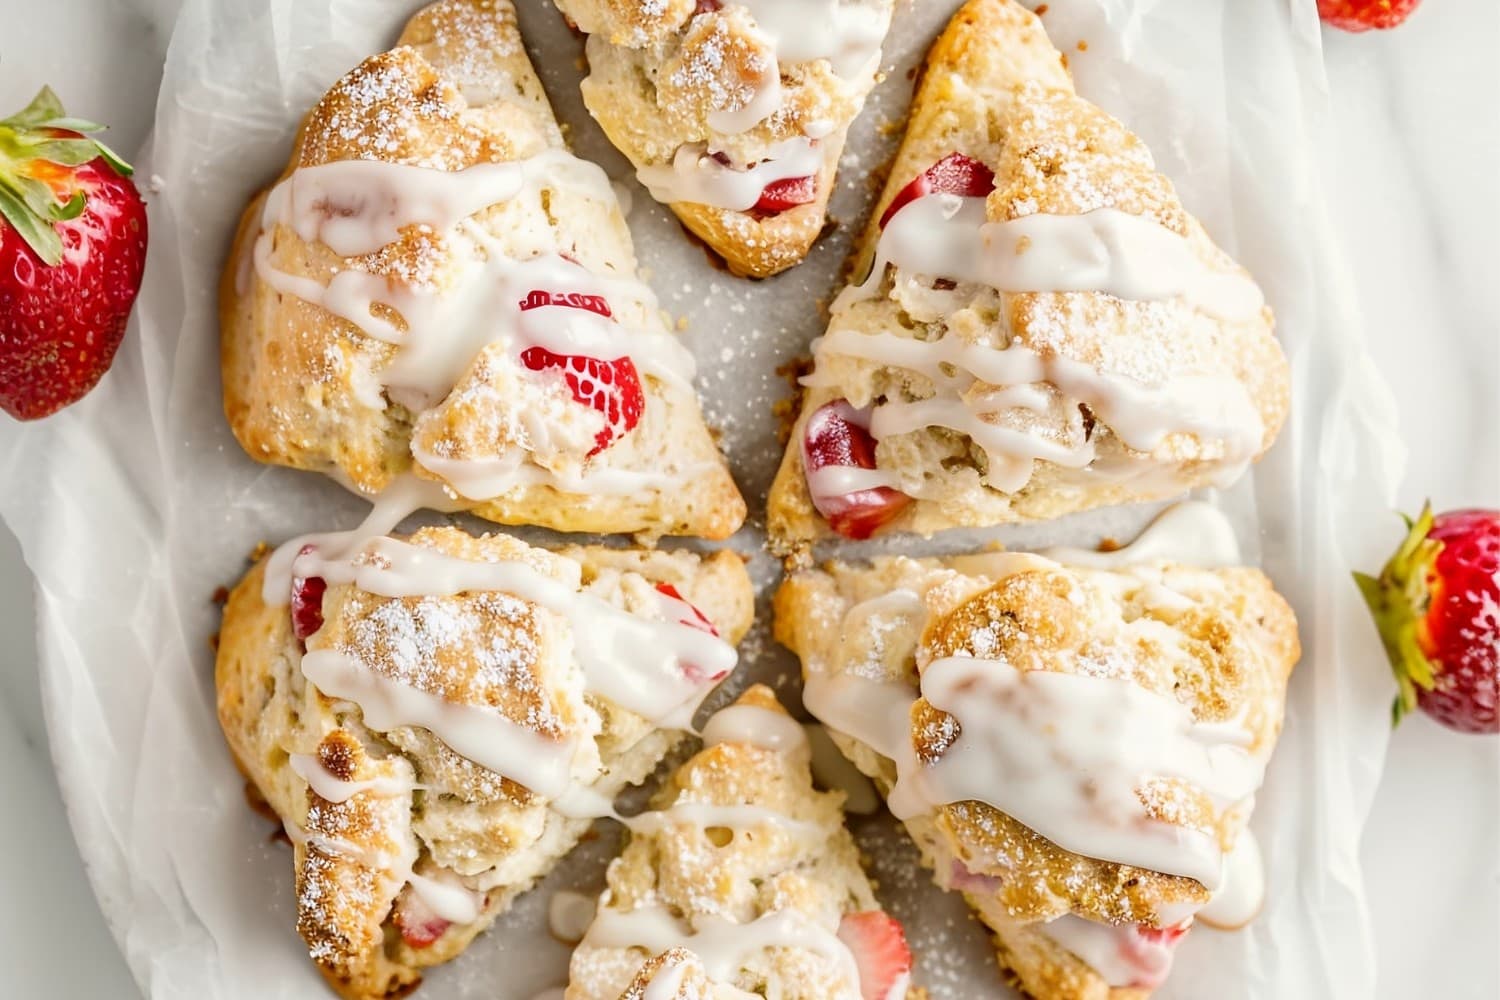 Classic strawberry scones, featuring chunks of fresh strawberries baked to perfection